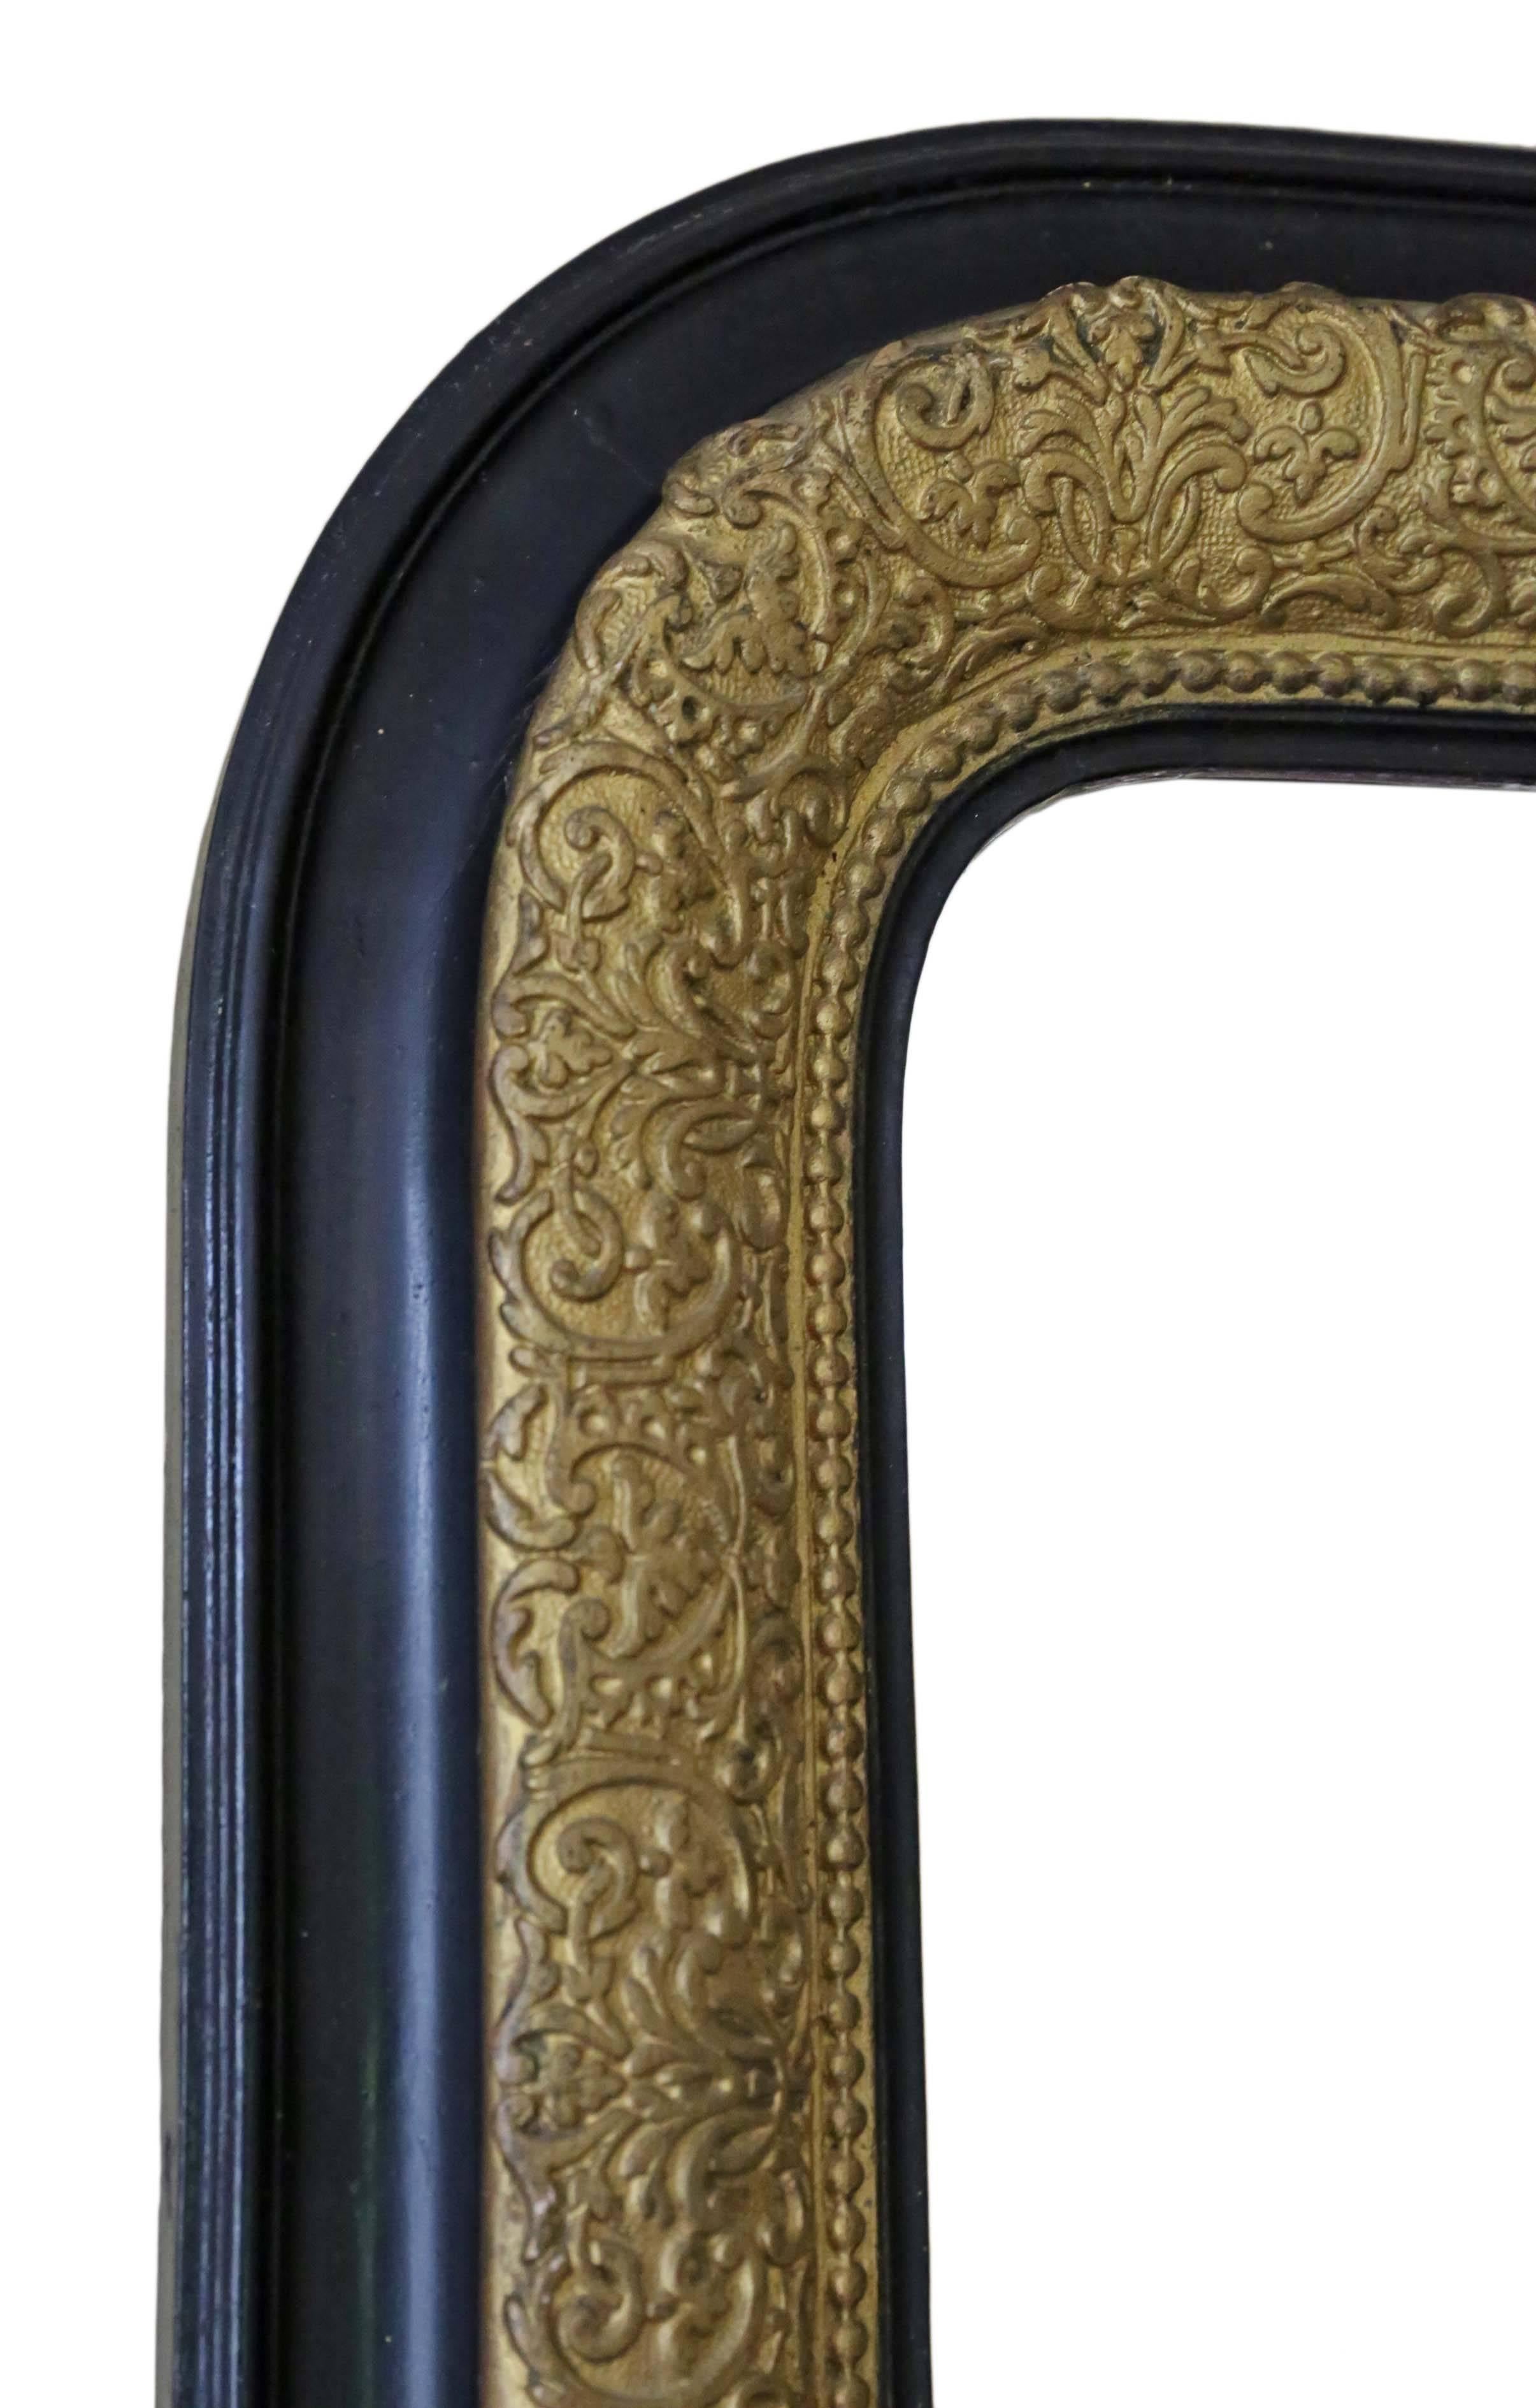 Antique Victorian, circa 1900 ebonized / gilt wall mirror or overmantel.

This is a lovely mirror, that is full of age, charm and character, no woodworm.

Would look amazing in the right location.

The mirror is in good condition with light